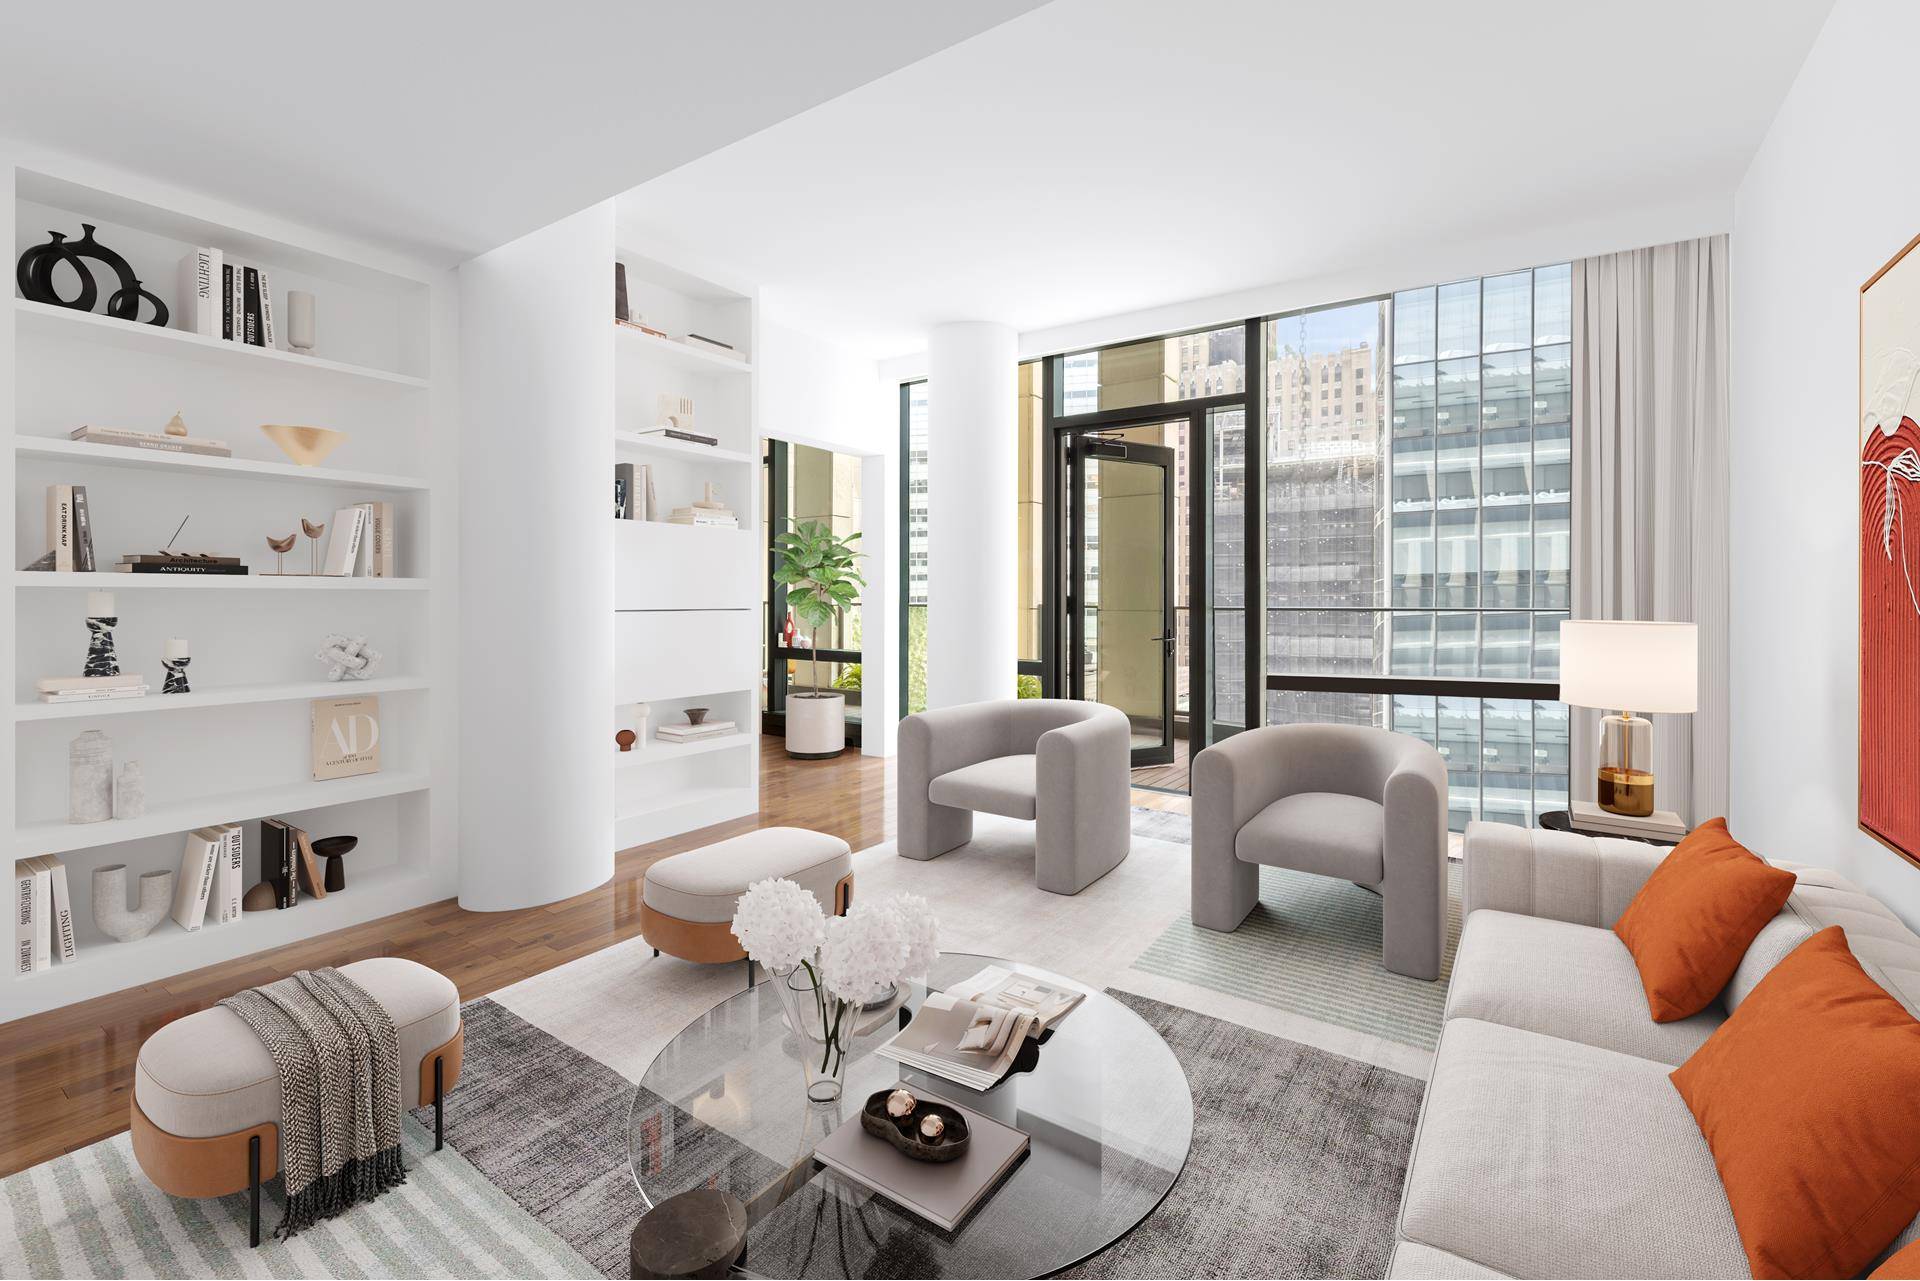 Residence 7L is a stunning duplex home with a double height loggia located in one of TriBeCa's most sought after, full service condominiums.